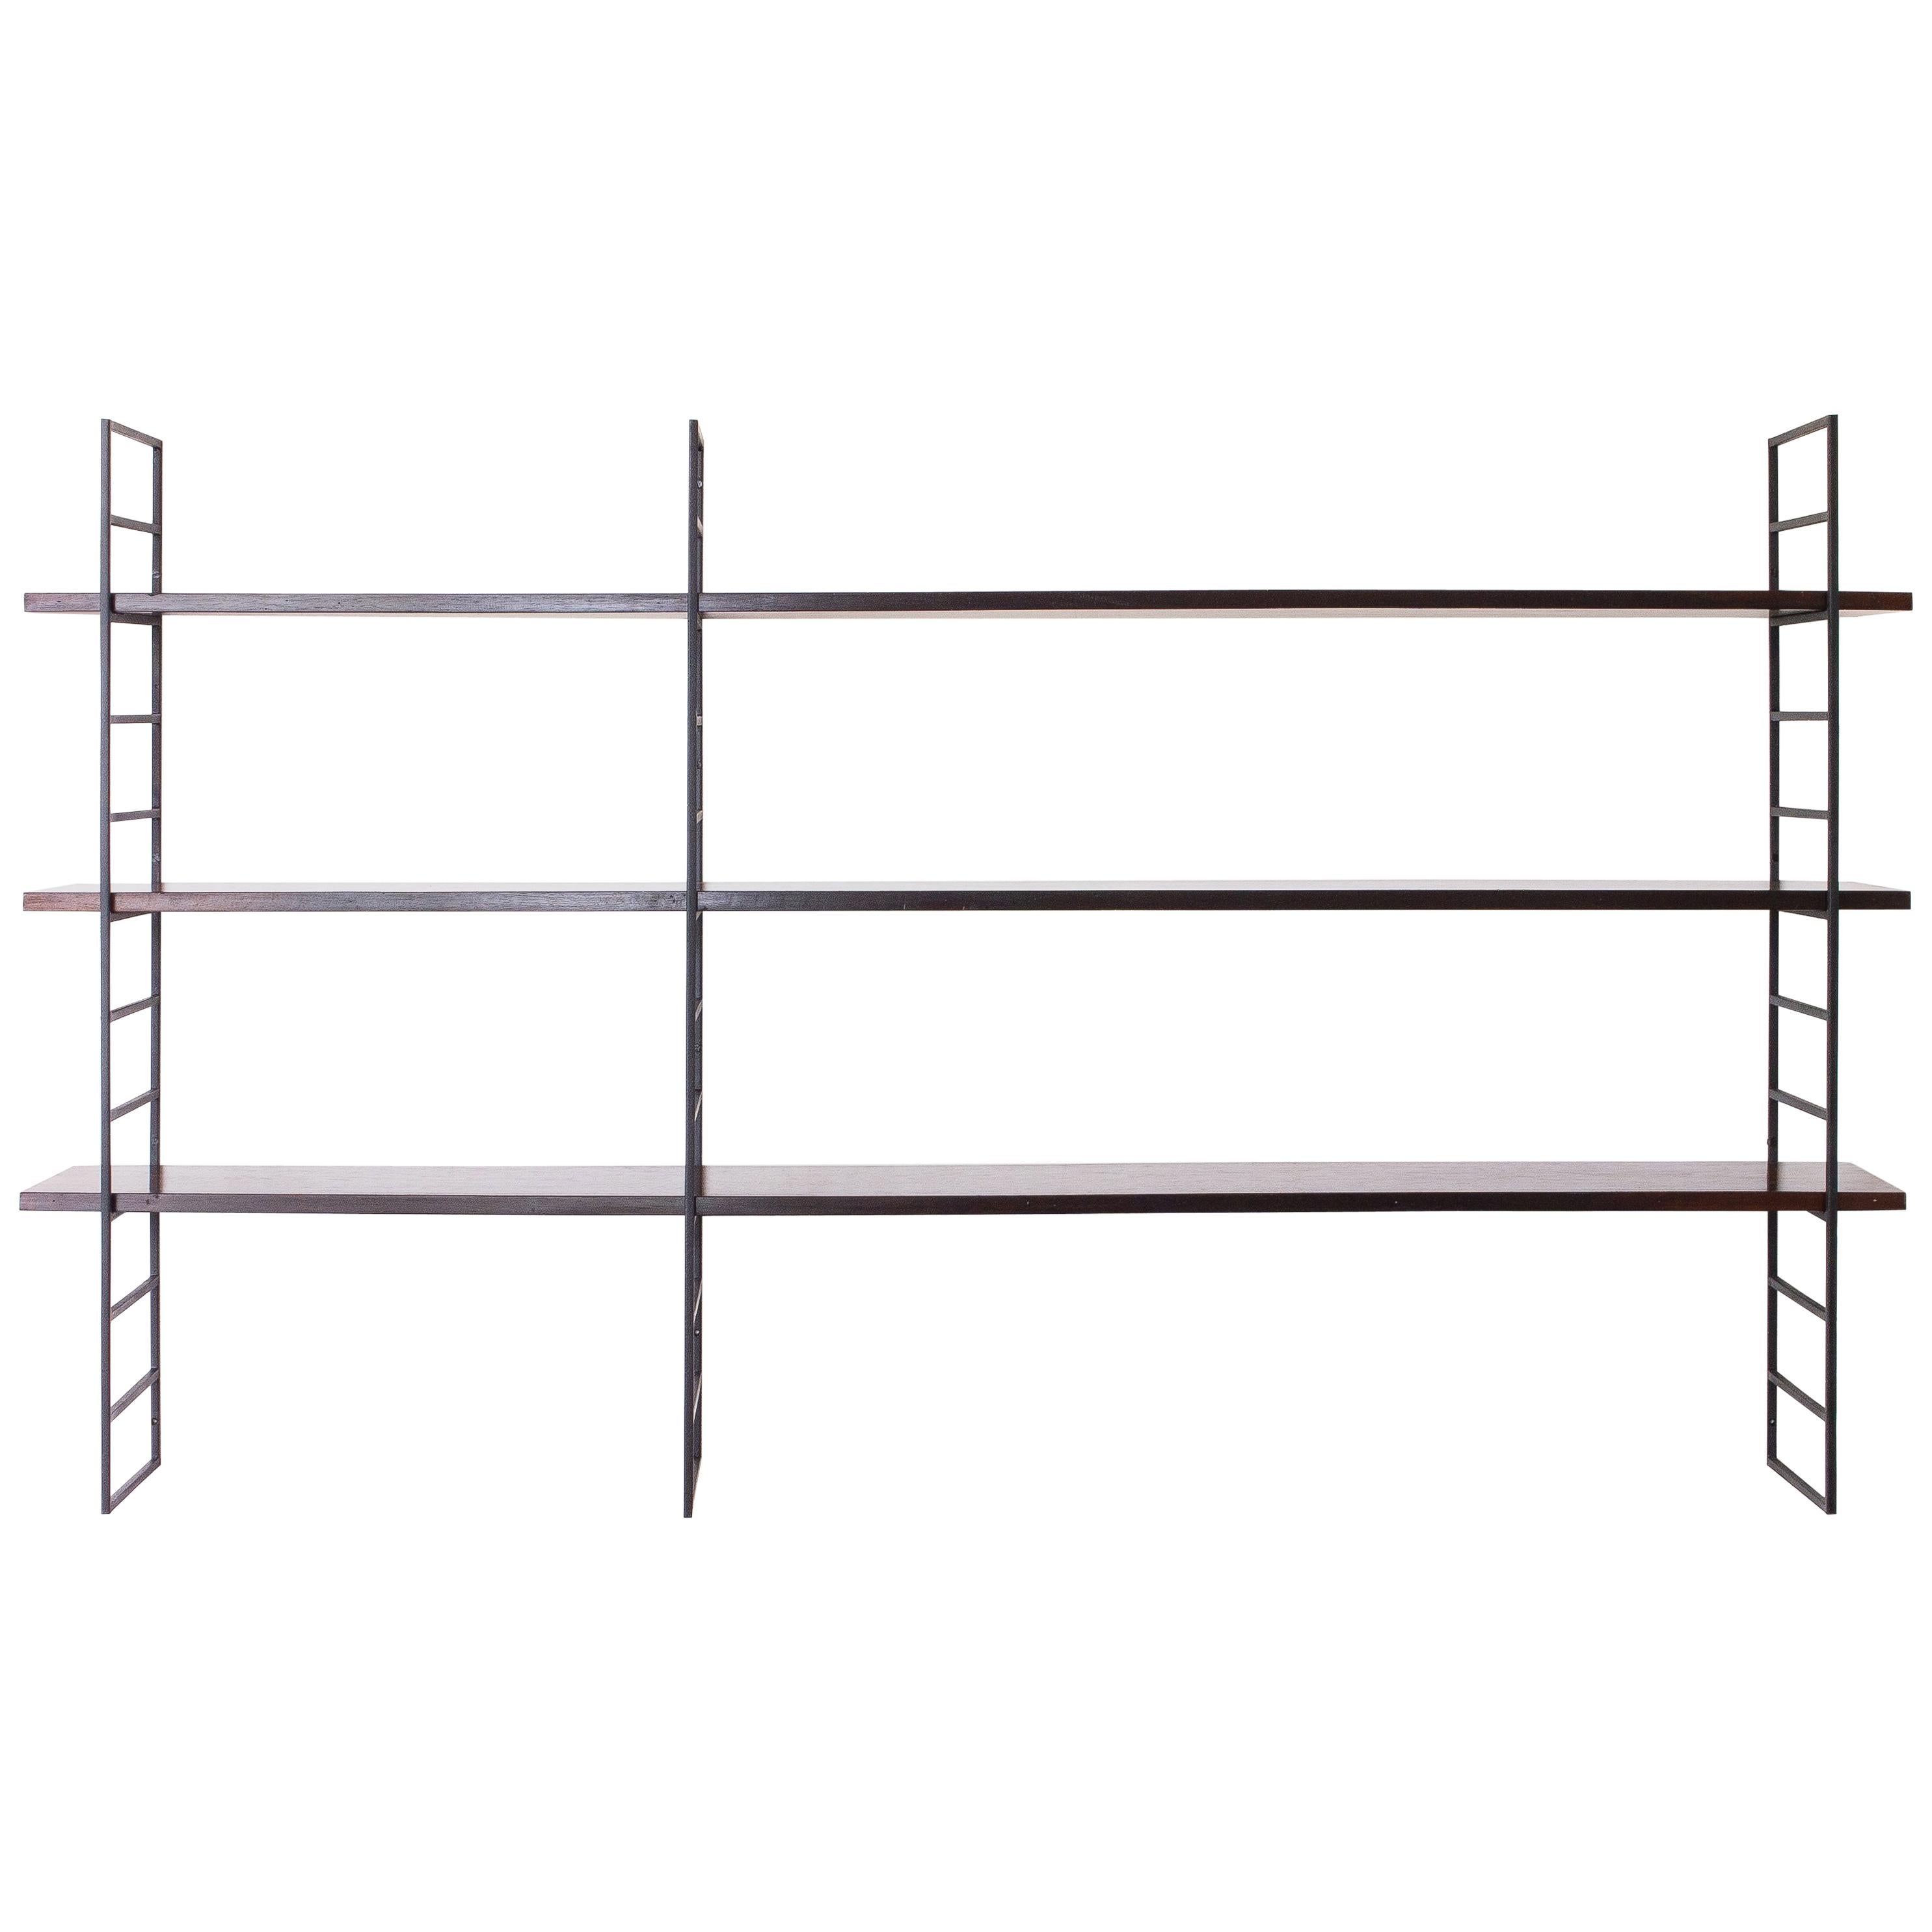 1960s Floating Shelving Unit in Rosewood and Wrought Iron, Brazilian Modernism